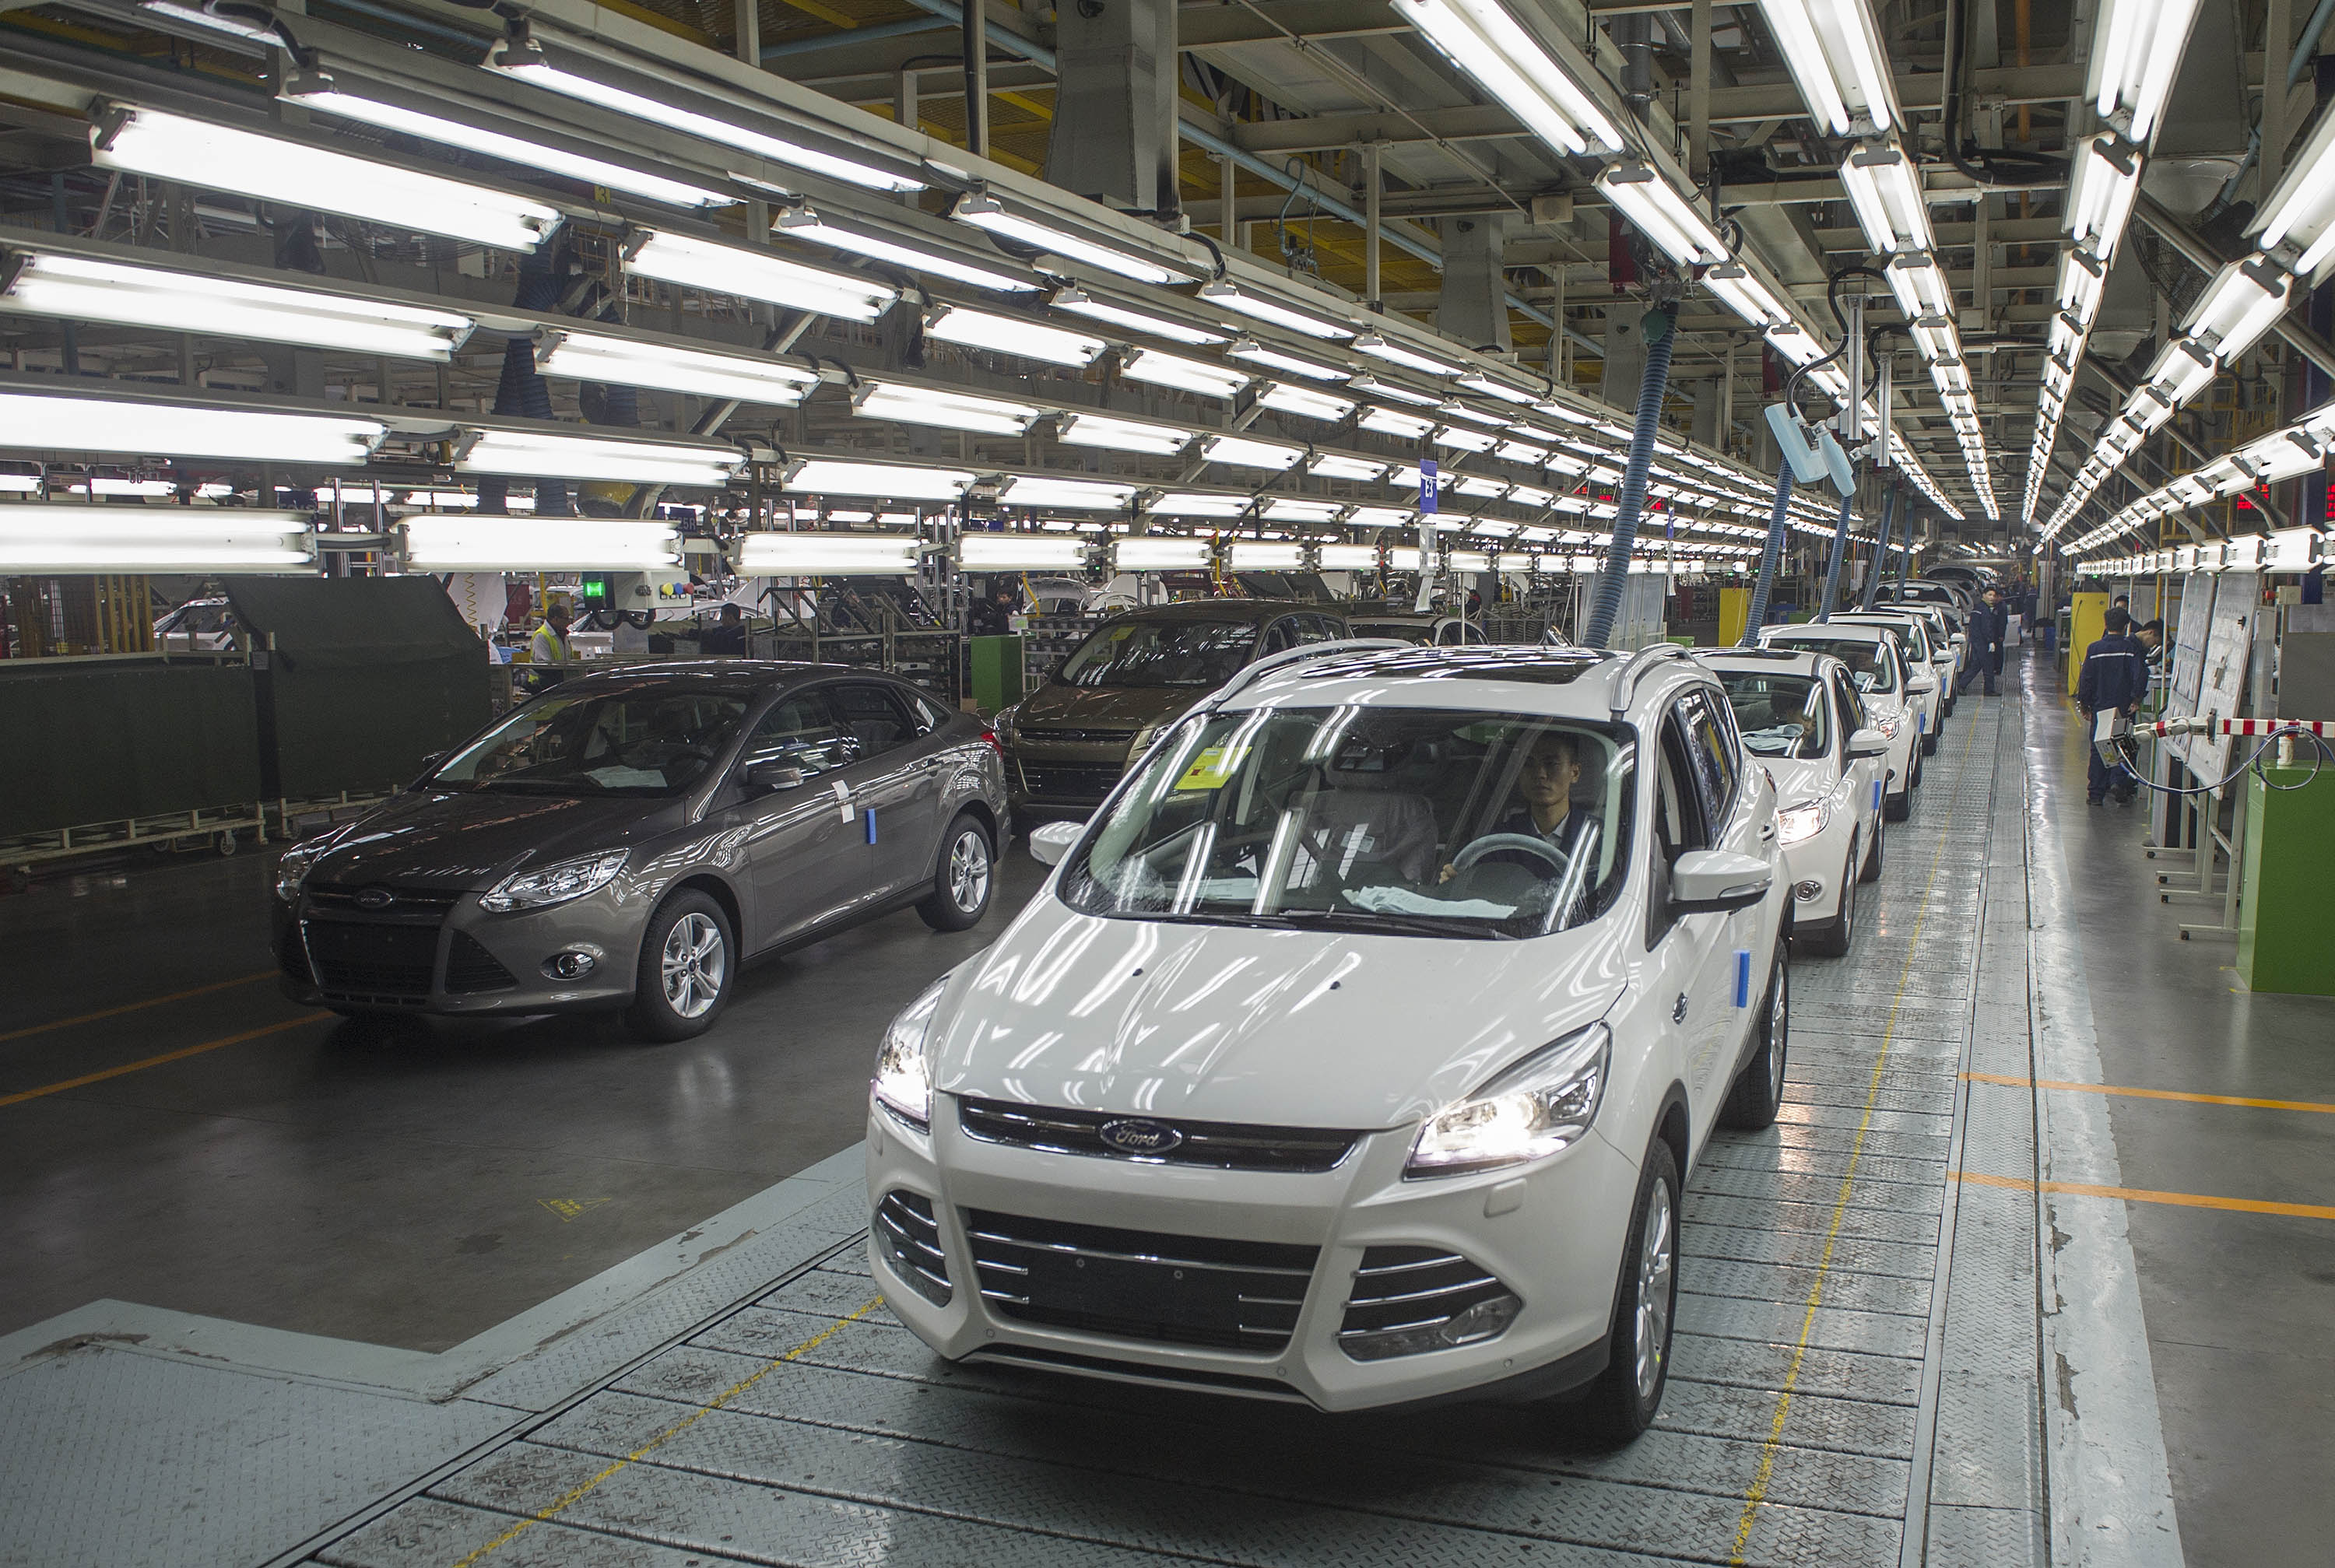 The workshop of Changan Ford Automobile Corporation (CFA). Ford has found success in China despite being late to the auto market. Photo: Xinhua